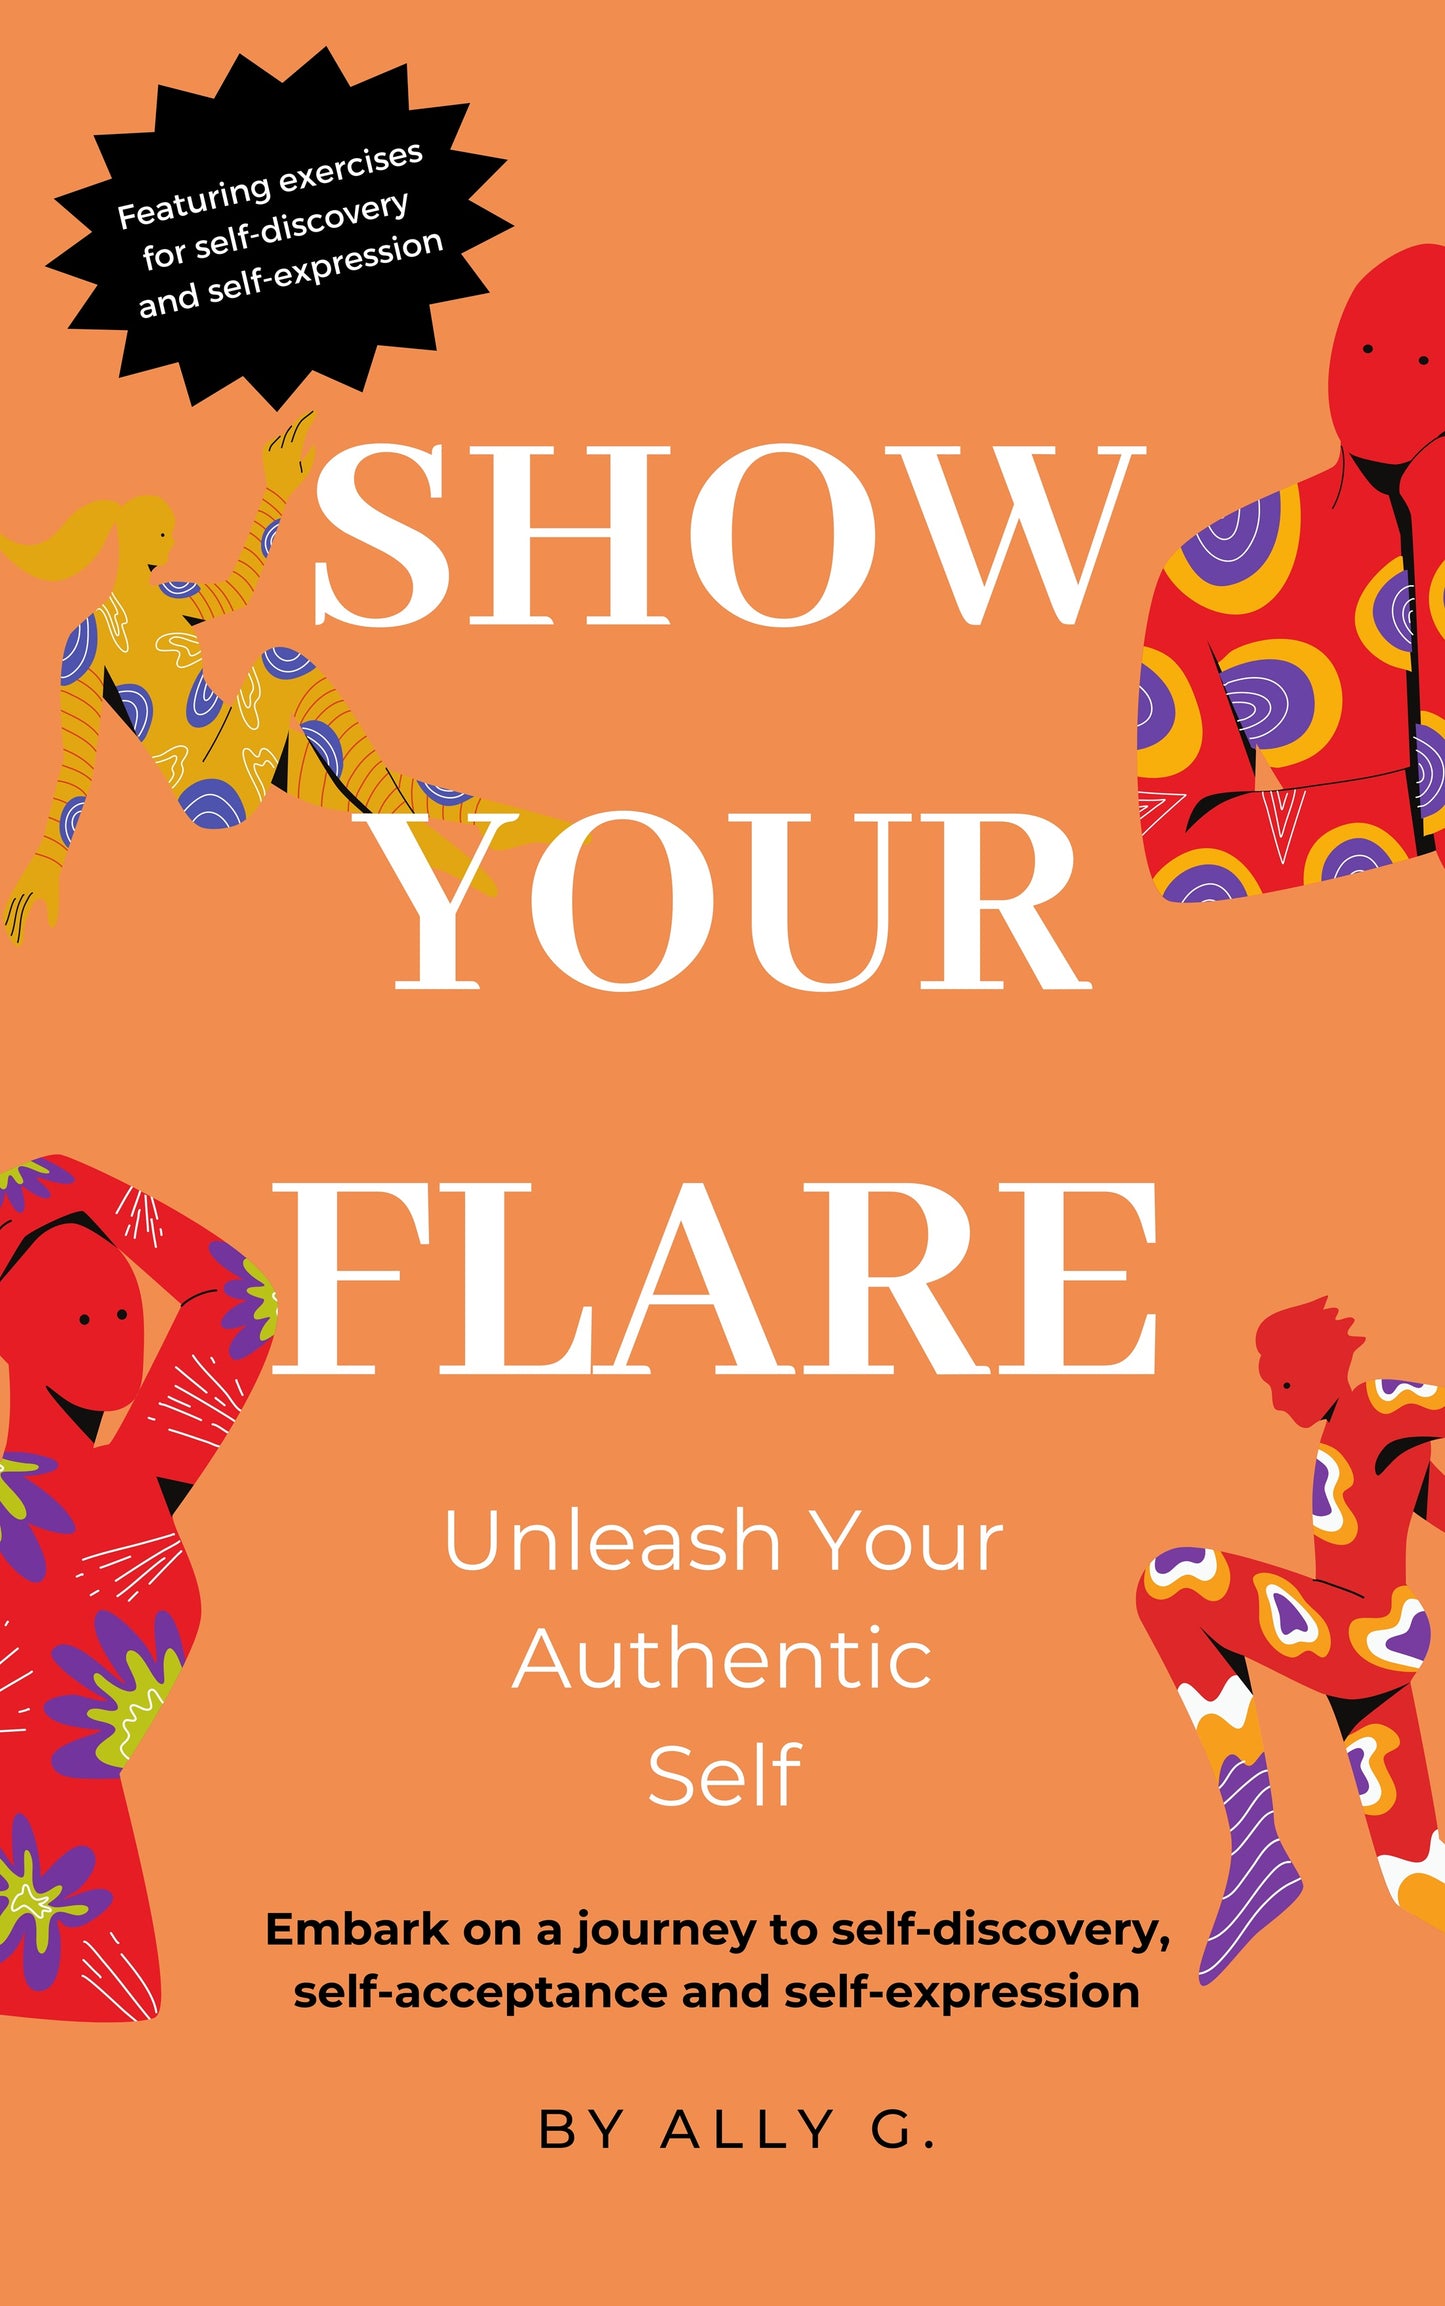 Show Your Flare: Unleash Your Authentic Self | Embark on a journey to self-discovery, self-acceptance and self-expression